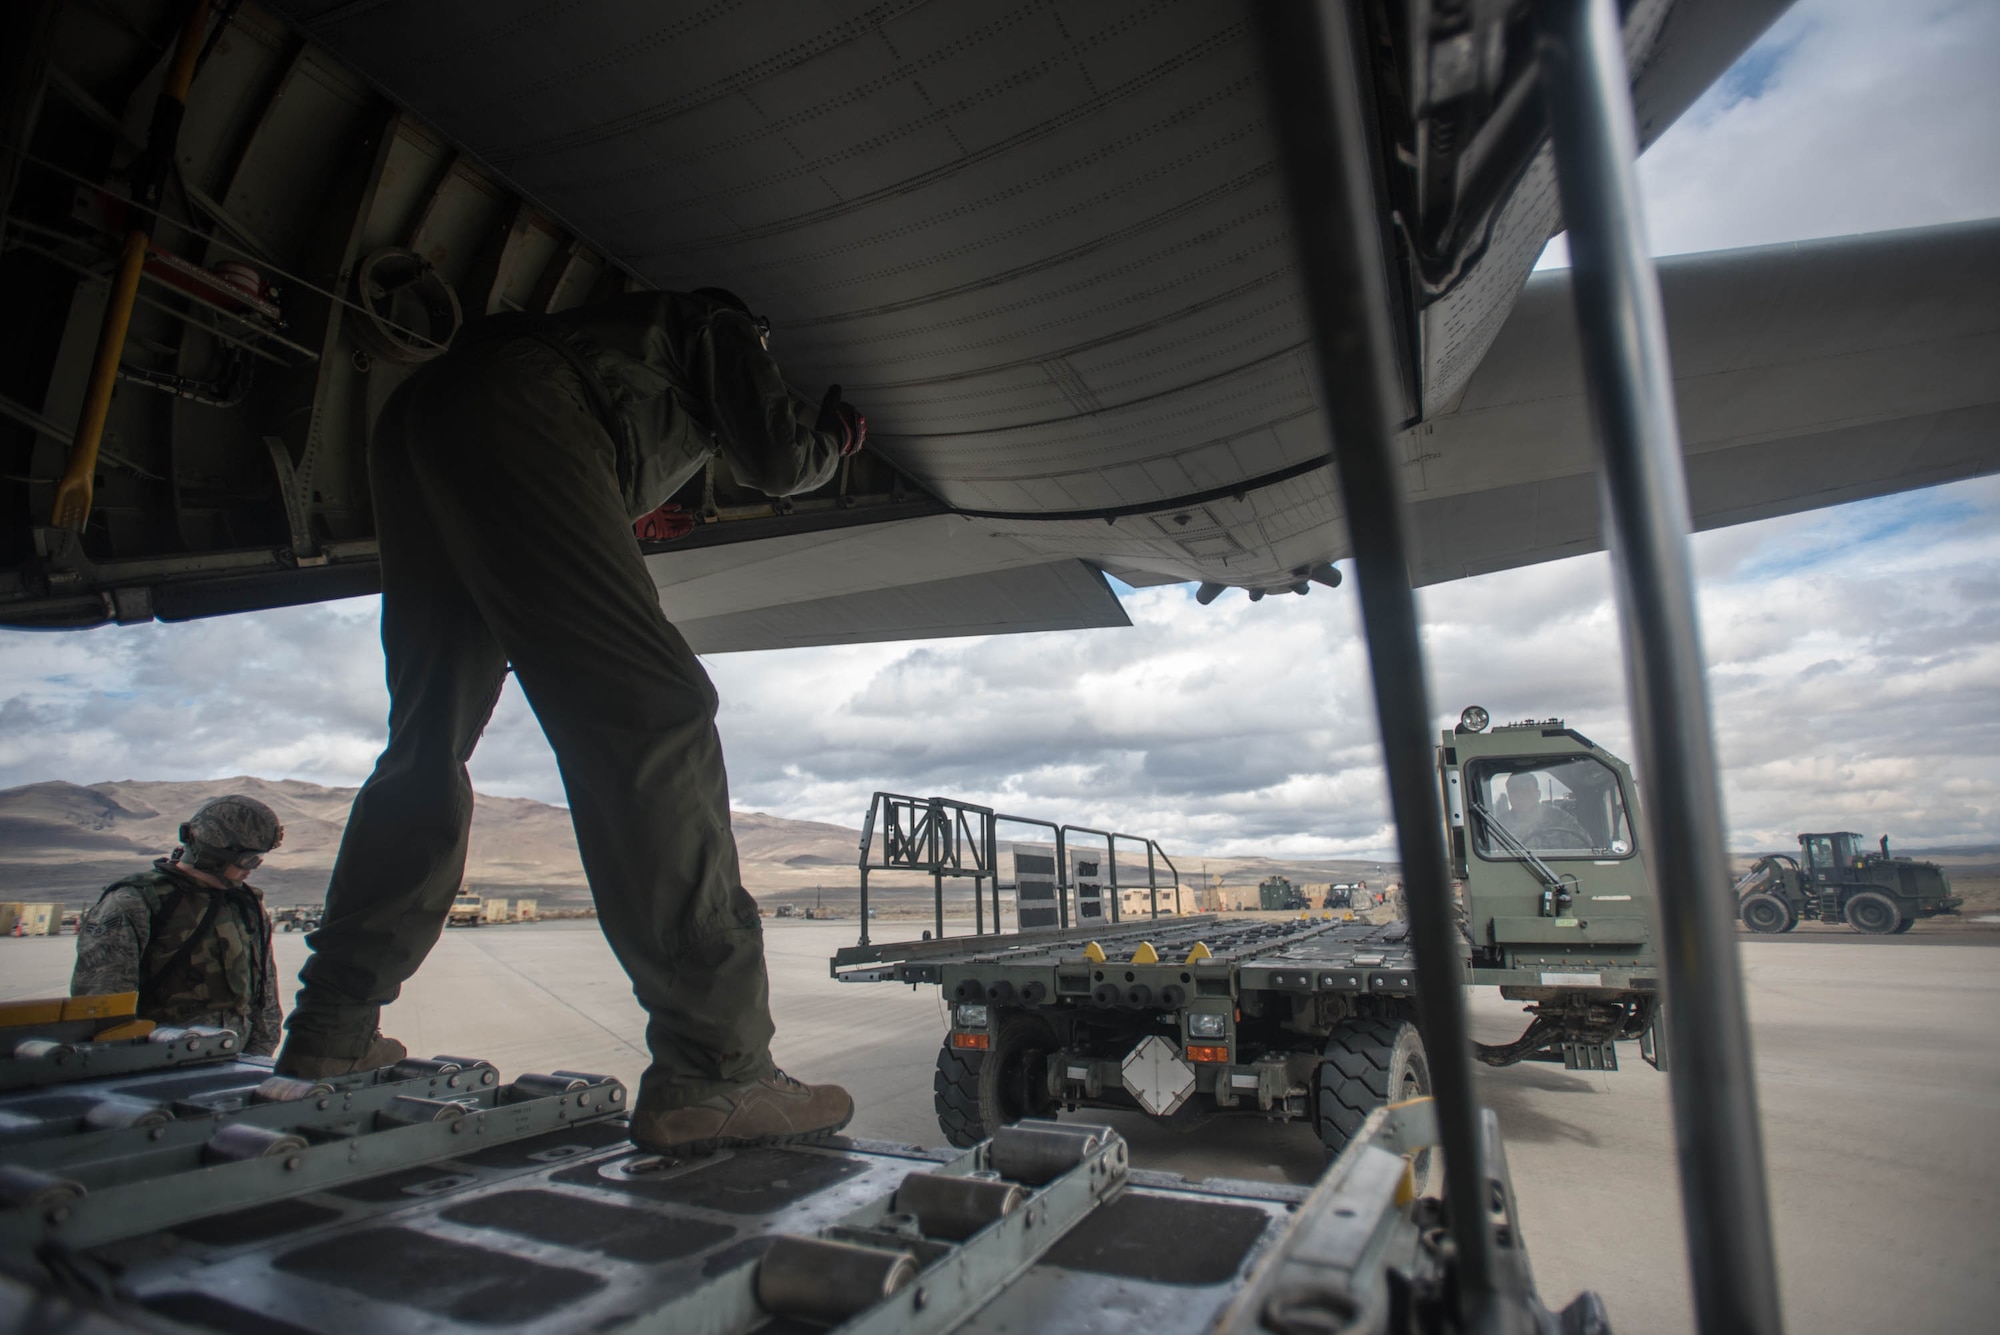 Aerial porters from the Kentucky Air National Guard’s 123rd Contingency Response Group use a Halvorsen Loader to off-load cargo from a New York Air National Guard C-130 at Amedee Army Airfield, Calif., during Operation Lumberjack on March 9, 2016. The 123rd CRG is working in conjunction with the U.S. Army’s 688th Rapid Port Opening Element and a team from the Defense Logistics Agency to operate Joint Task Force-Port Opening Sangala during the week-long exercise. The objective of the JTF-PO is to establish an aerial port of debarkation, provide initial distribution capability and set up warehousing for distribution beyond a forward node. (Kentucky Air National Guard photo by Master Sgt. Phil Speck)